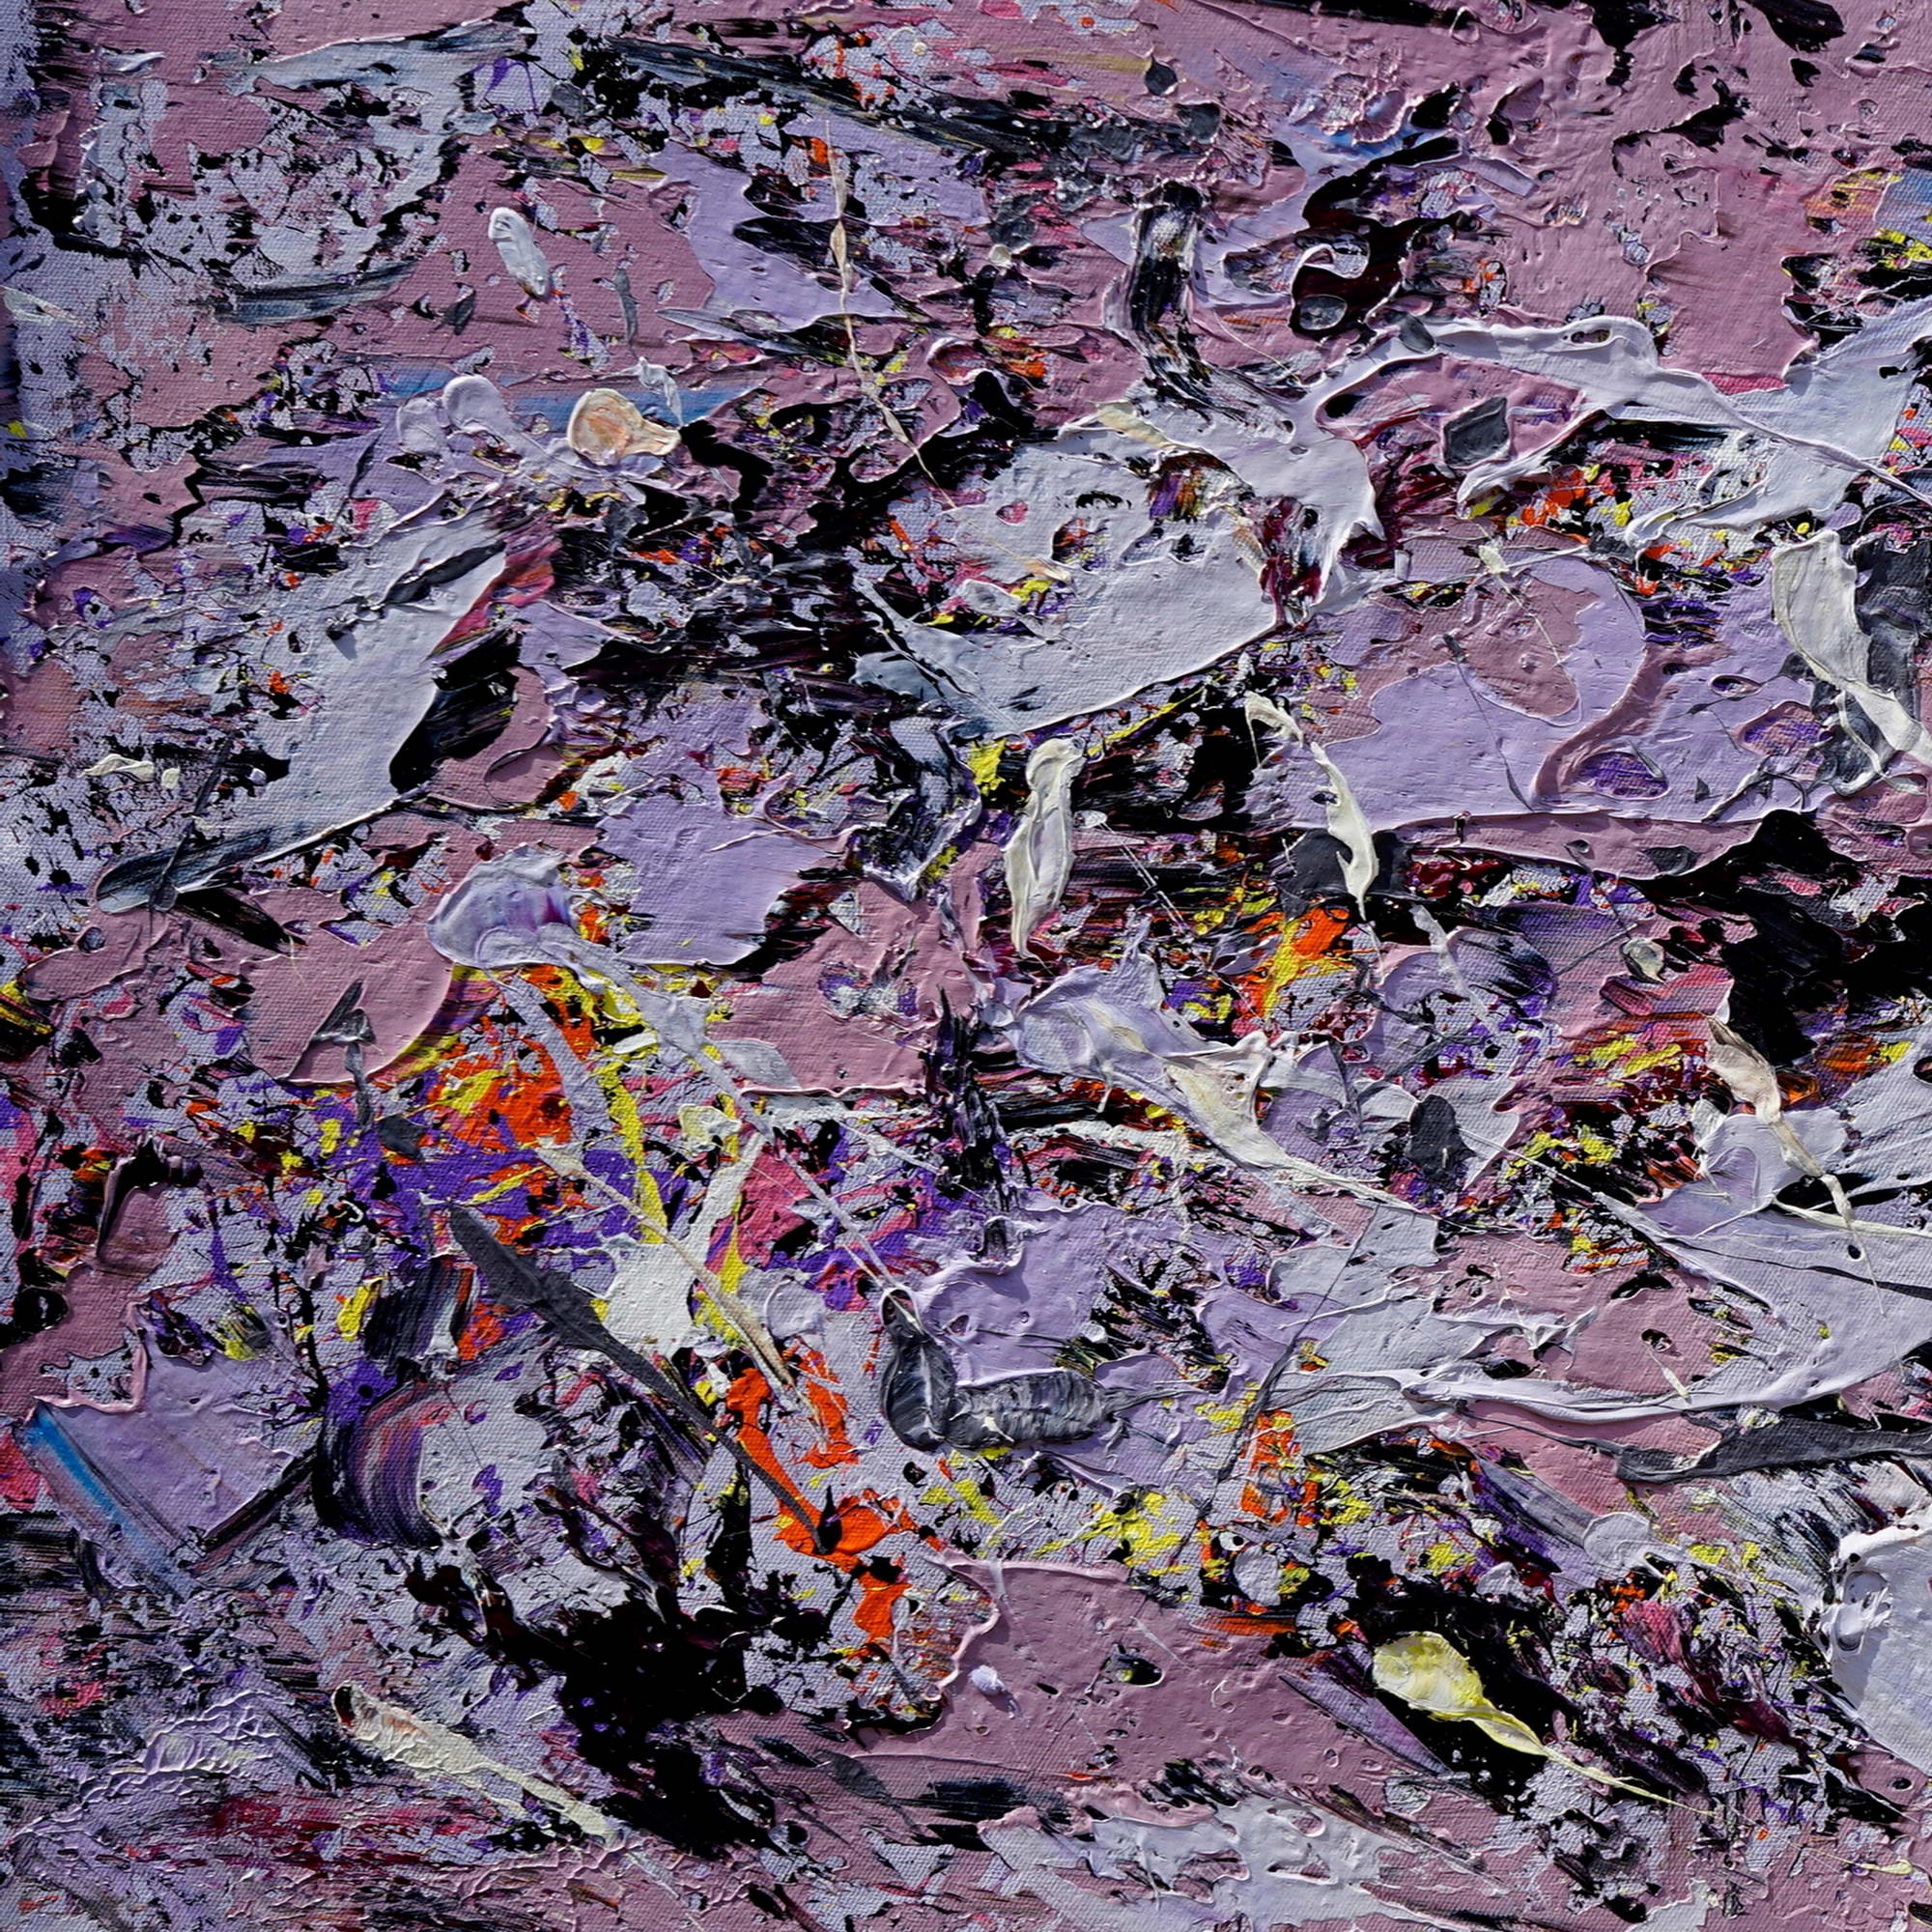 Hand painted Abstract Pollock style 75x150cm